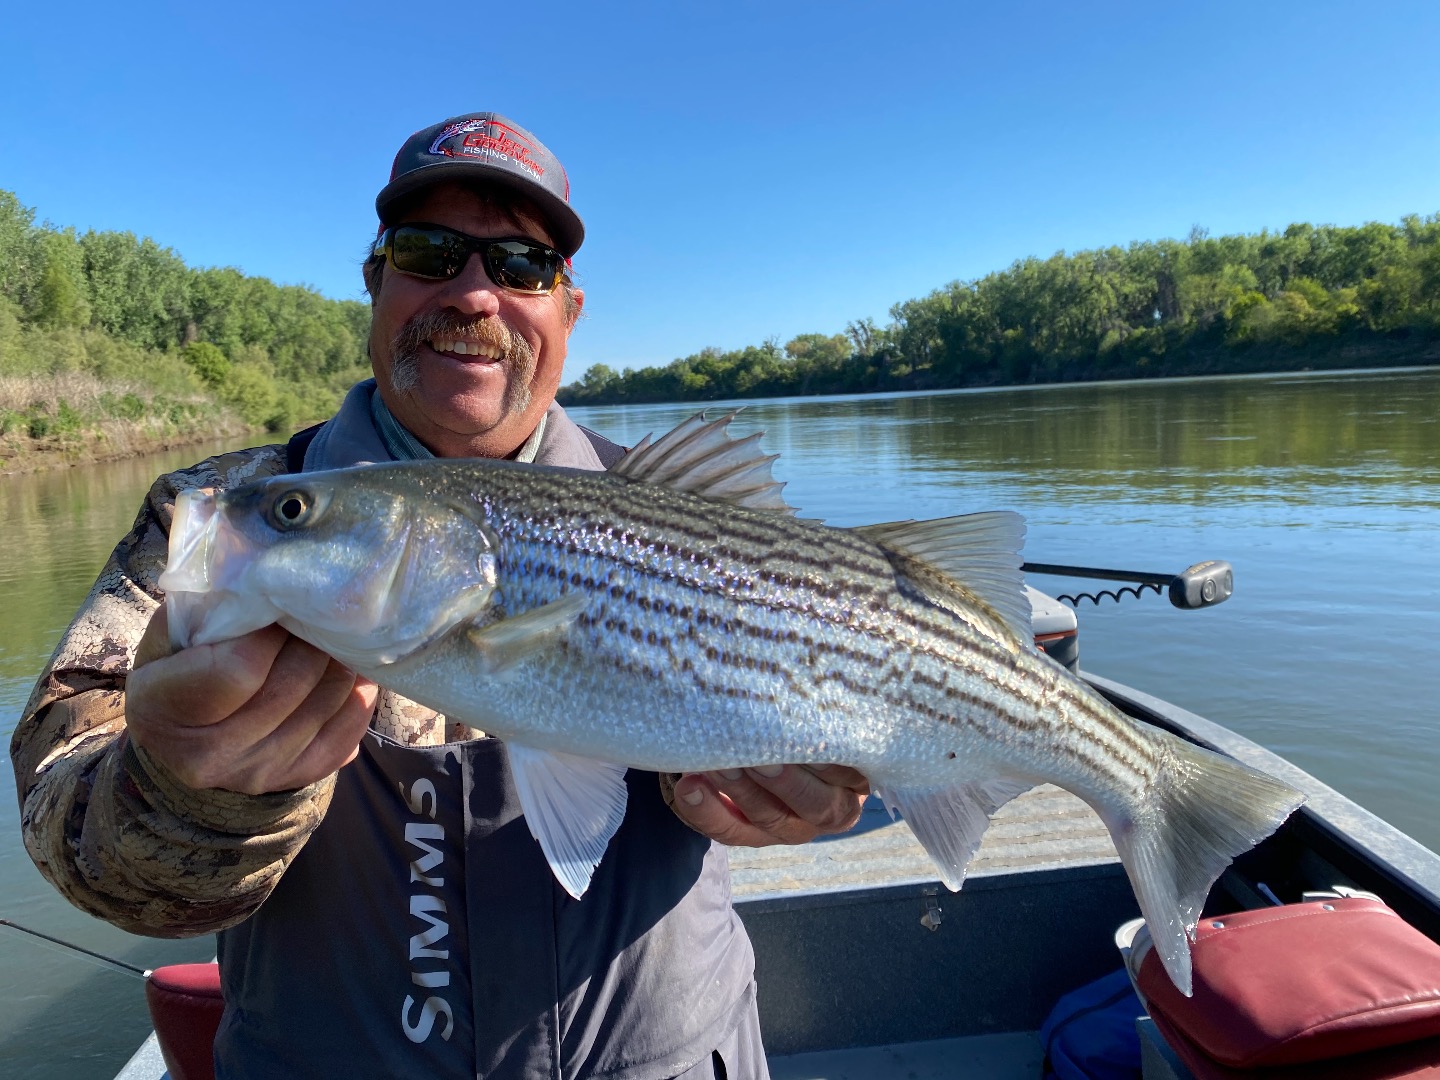 Stripers are loaded up in the Colusa area!